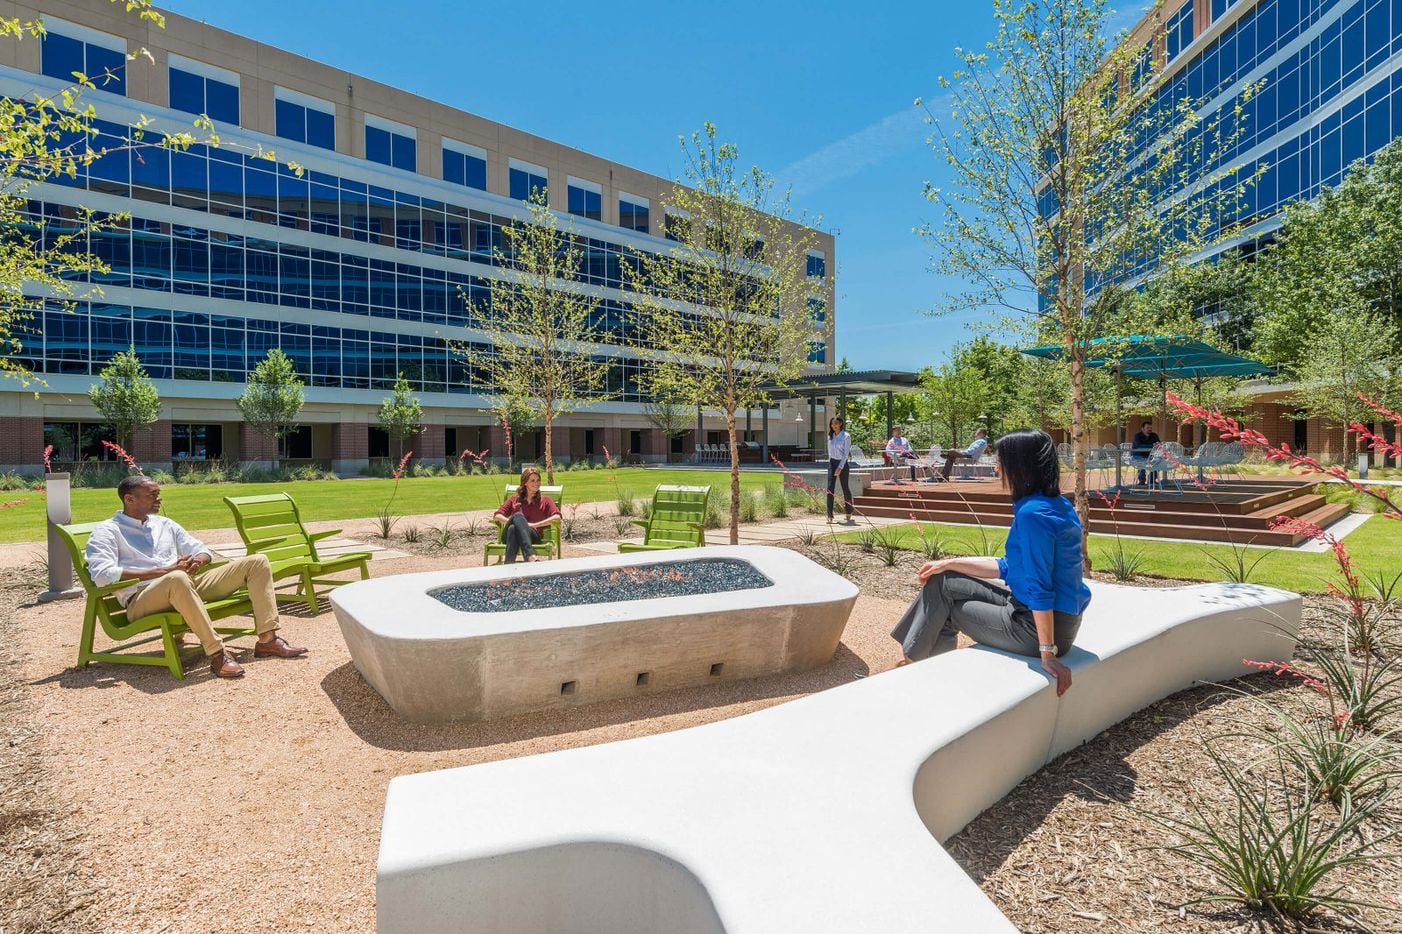 Workers have access to outdoor patio areas complete with a fire pit at the Galatyn Commons...